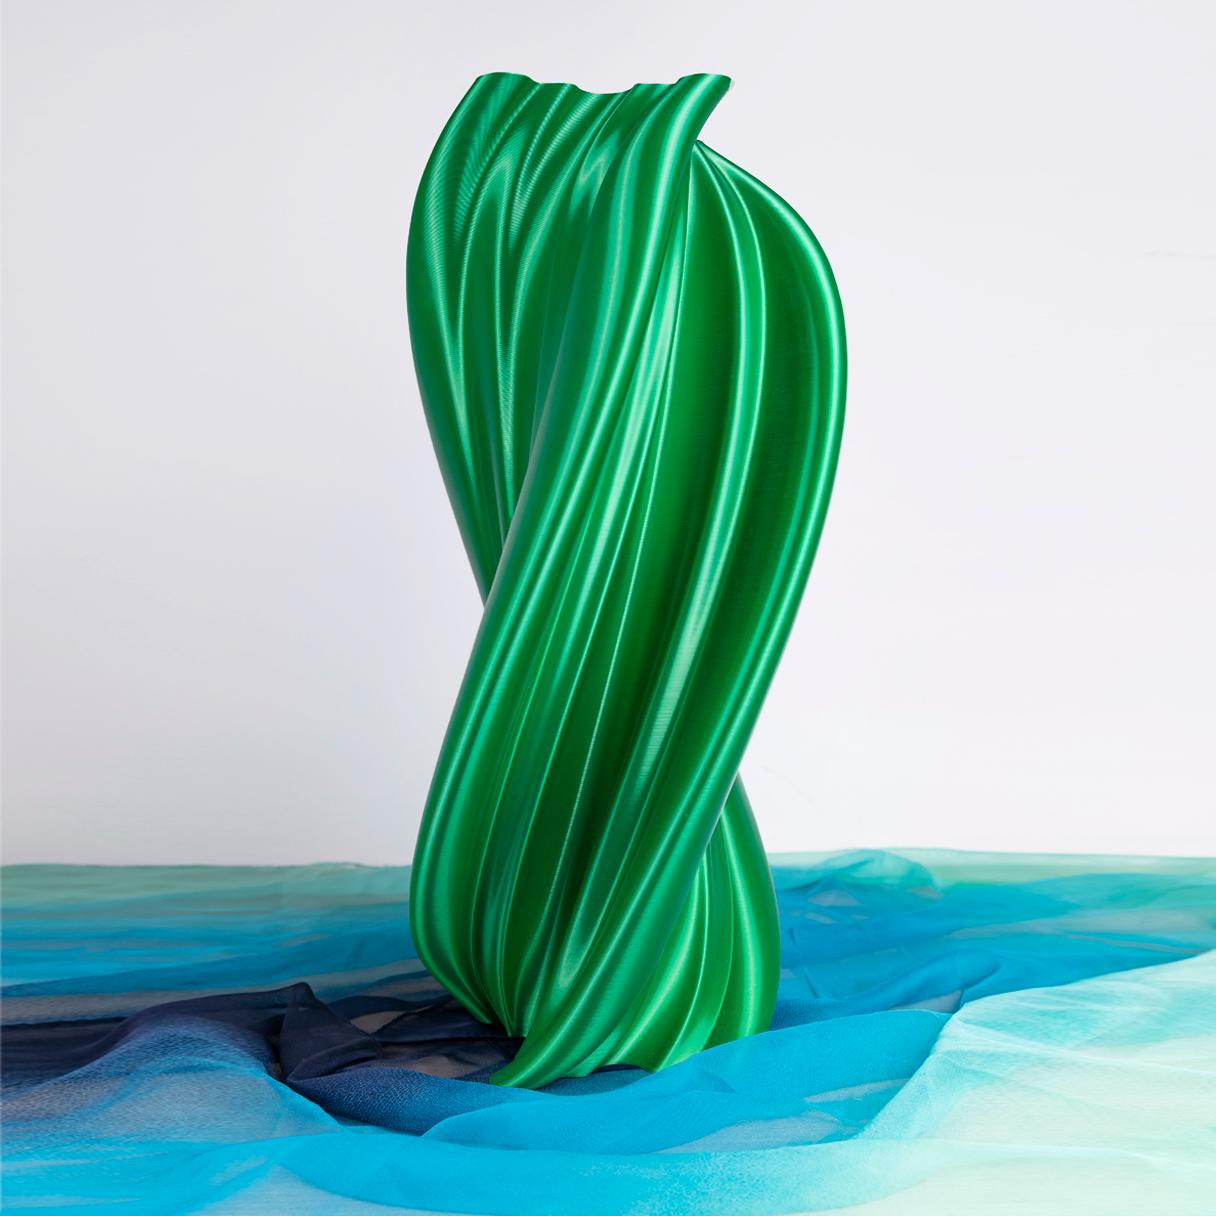 Resin Damocle, Green Contemporary Sustainable Vase-Sculpture